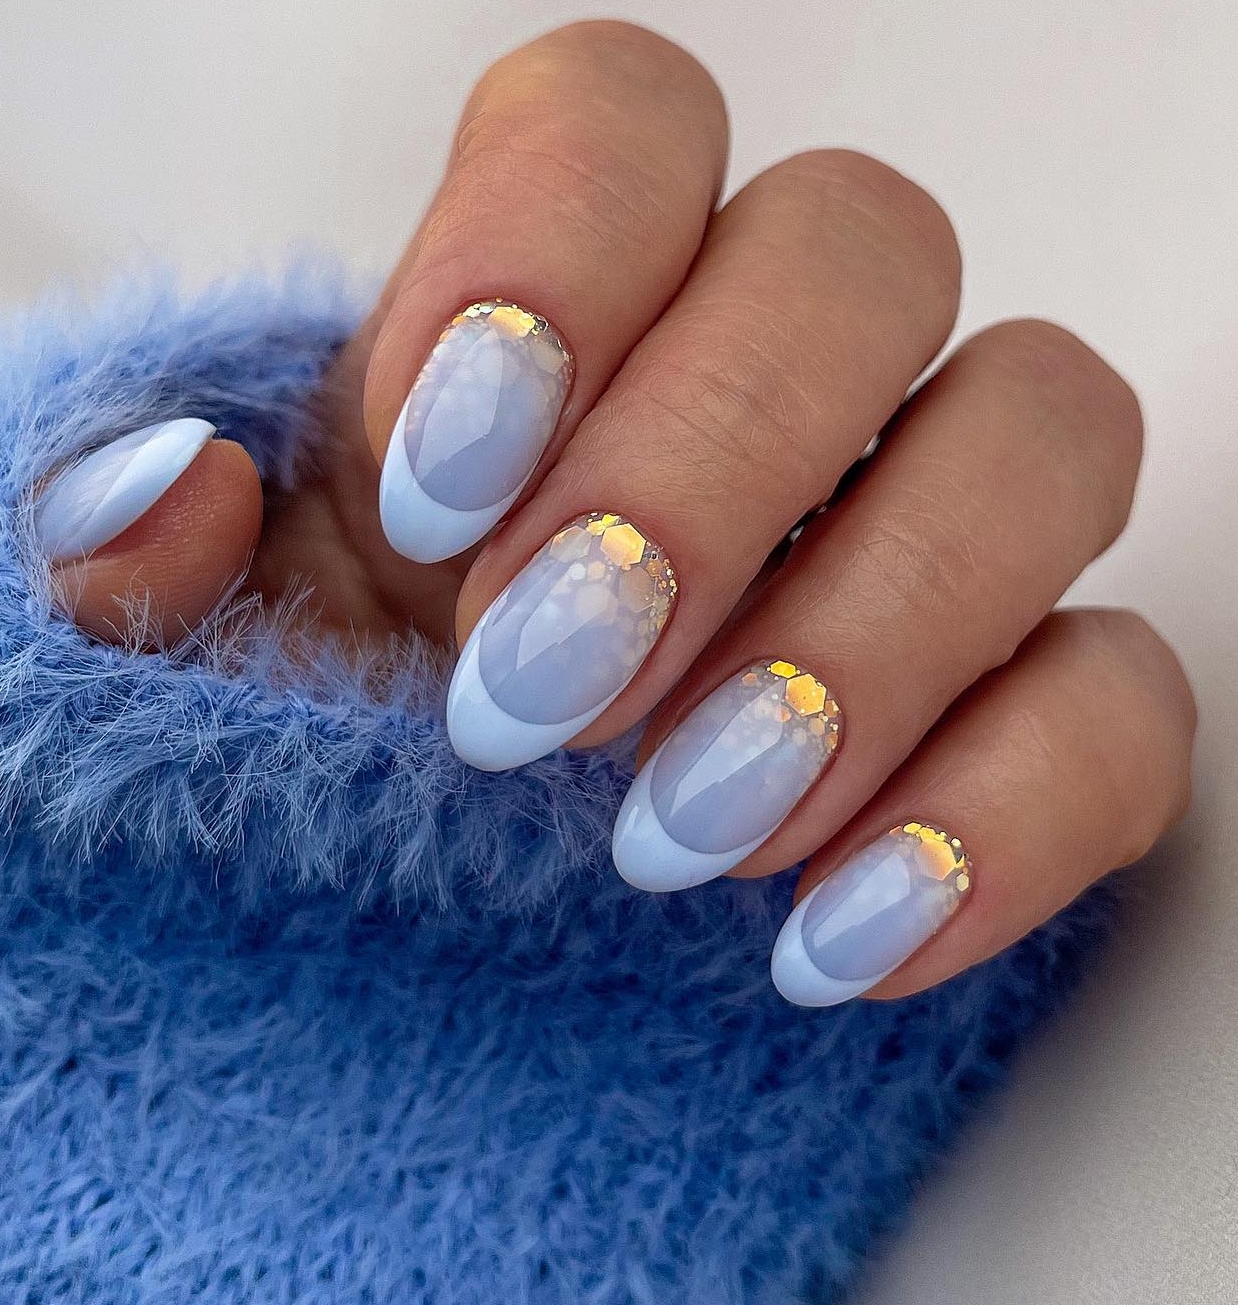 Almond-Shaped French Nails with Glitter